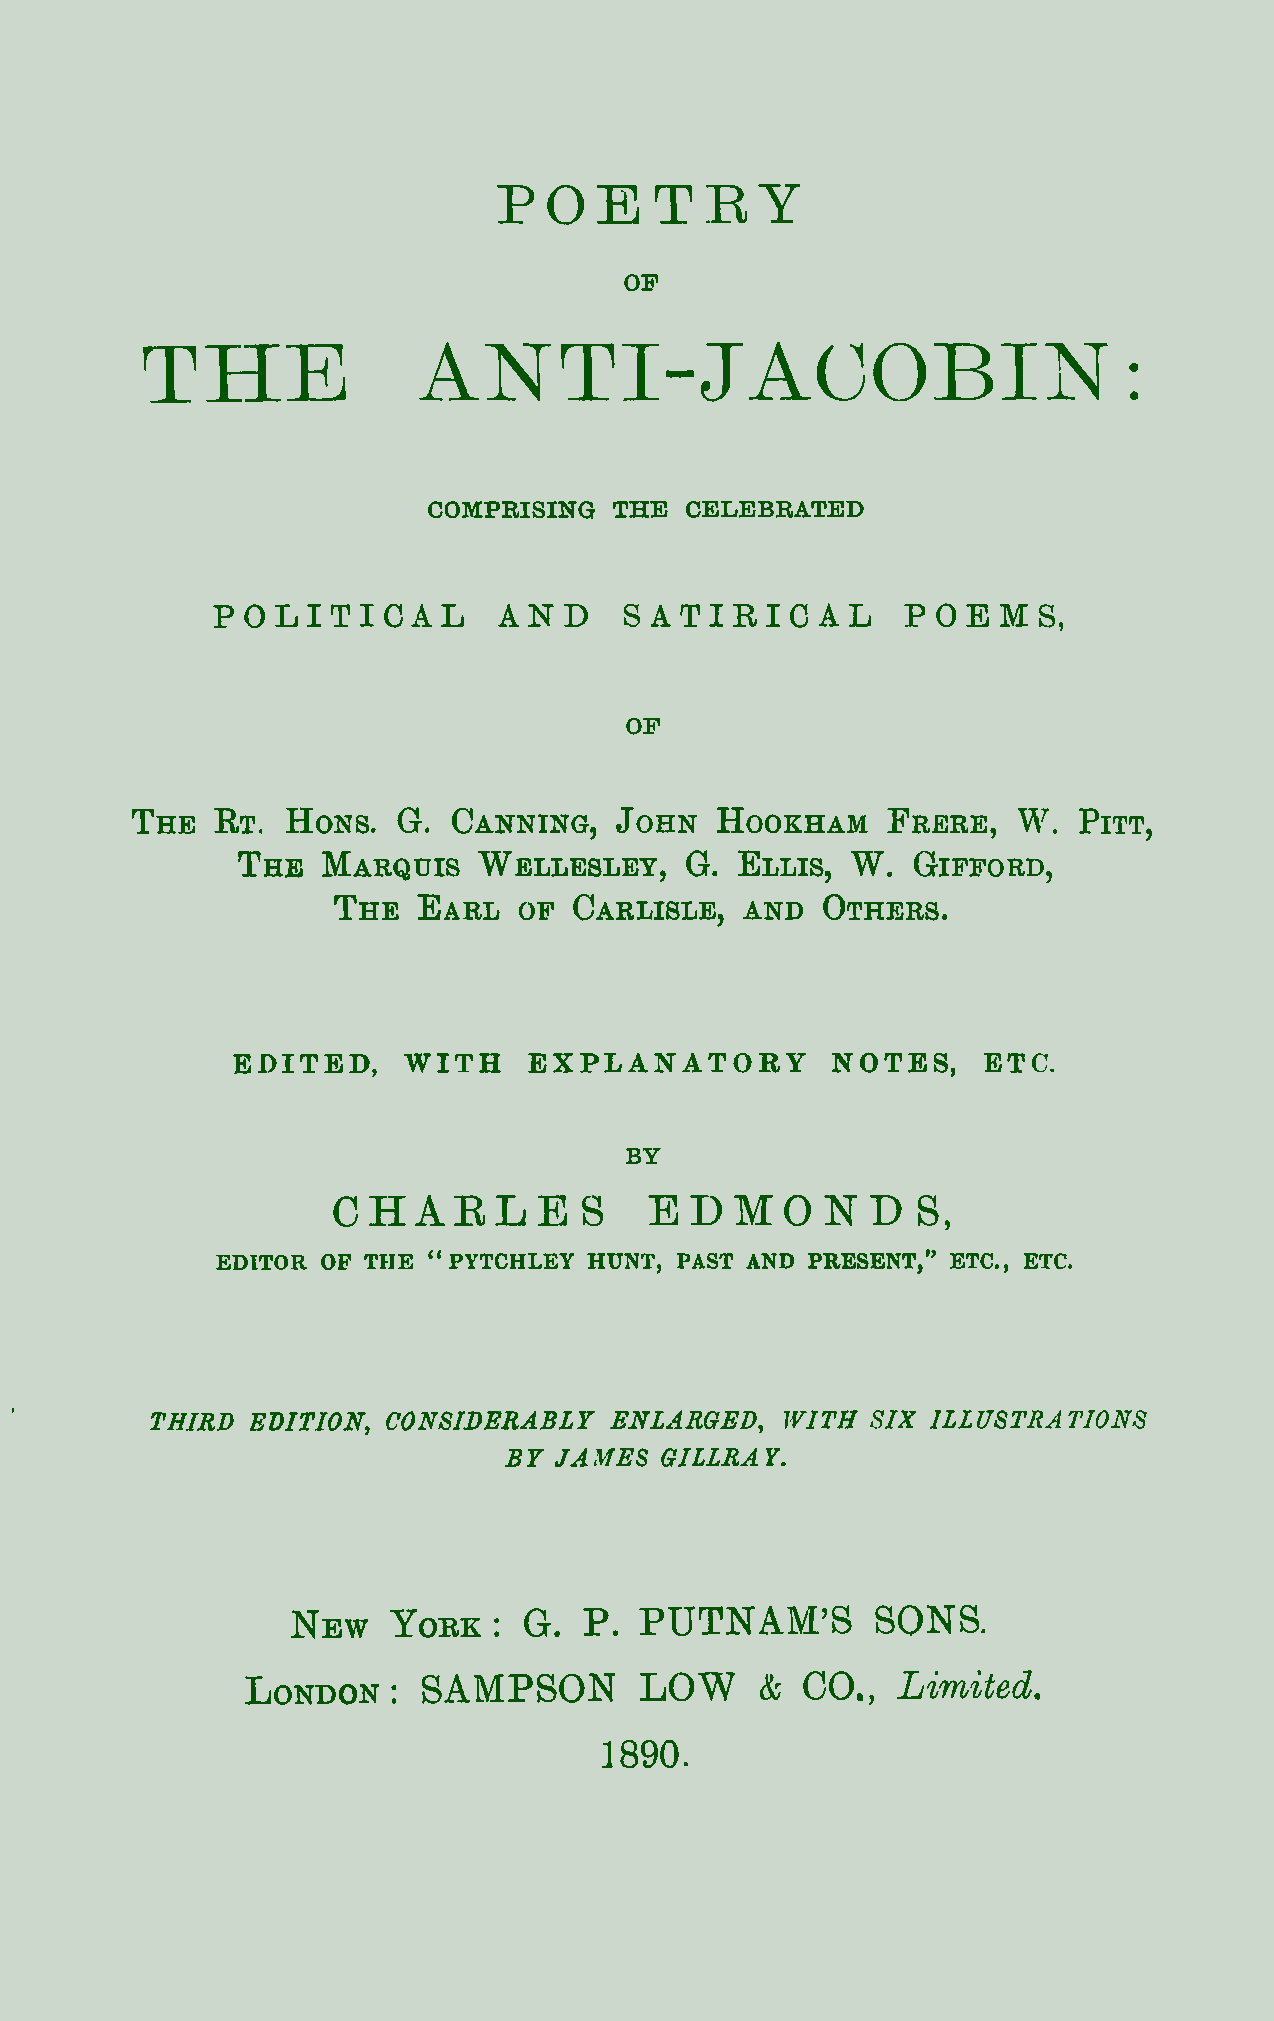 Poetry of the Anti-Jacobin&#10;Comprising the Celebrated Political and Satirical Poems, of the Rt. Hons. G. Canning, John Hookham Frere, W. Pitt, the Marquis Wellesley, G. Ellis, W. Gifford, the Earl of Carlisle, and Others.